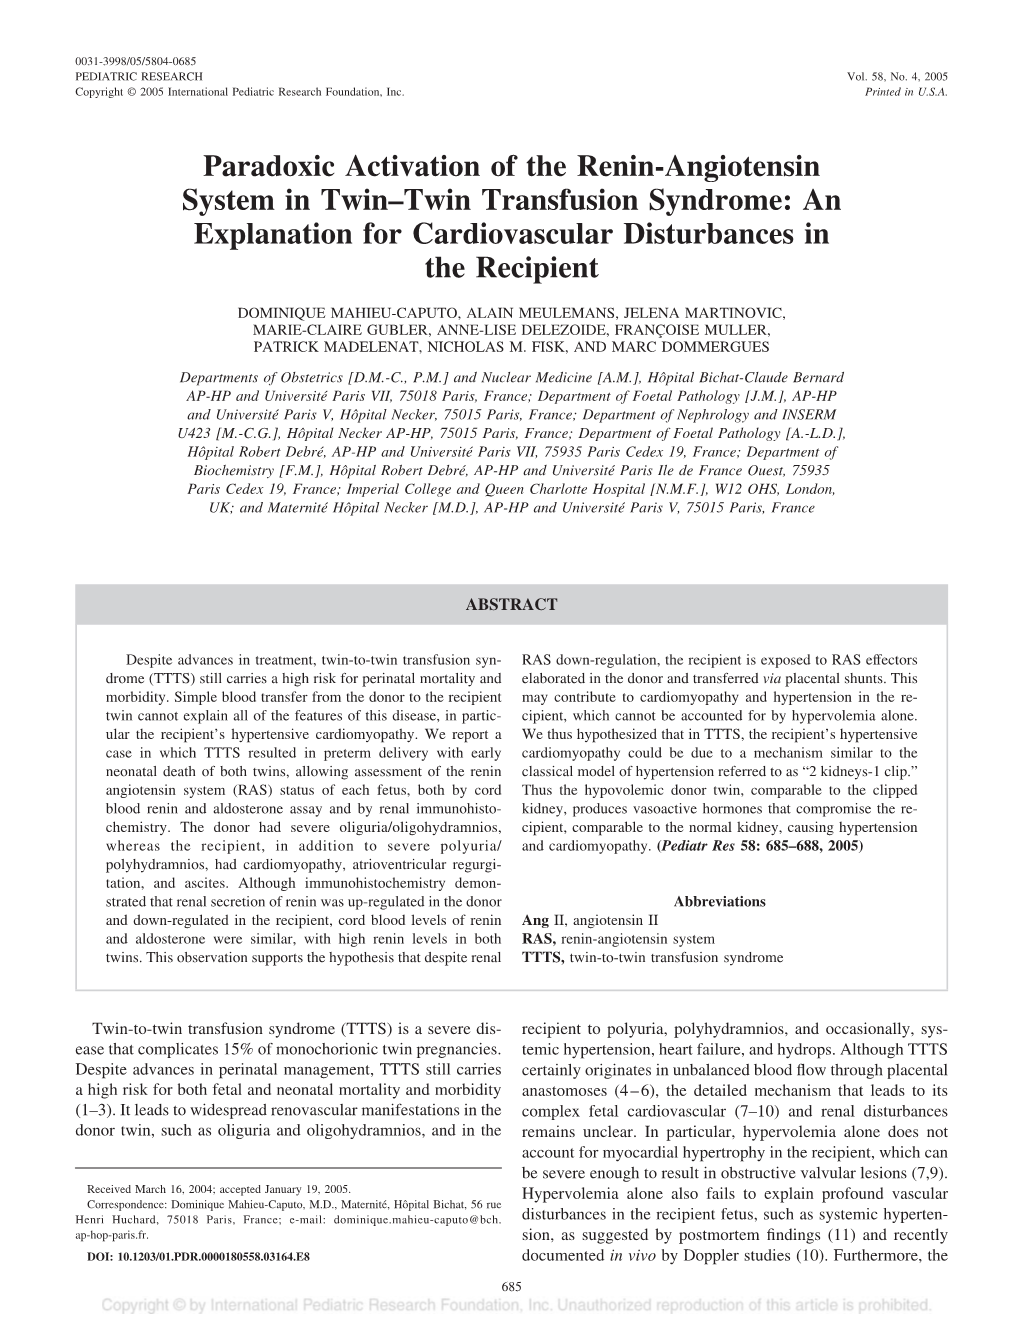 Paradoxic Activation of the Renin-Angiotensin System in Twin–Twin Transfusion Syndrome: an Explanation for Cardiovascular Disturbances in the Recipient